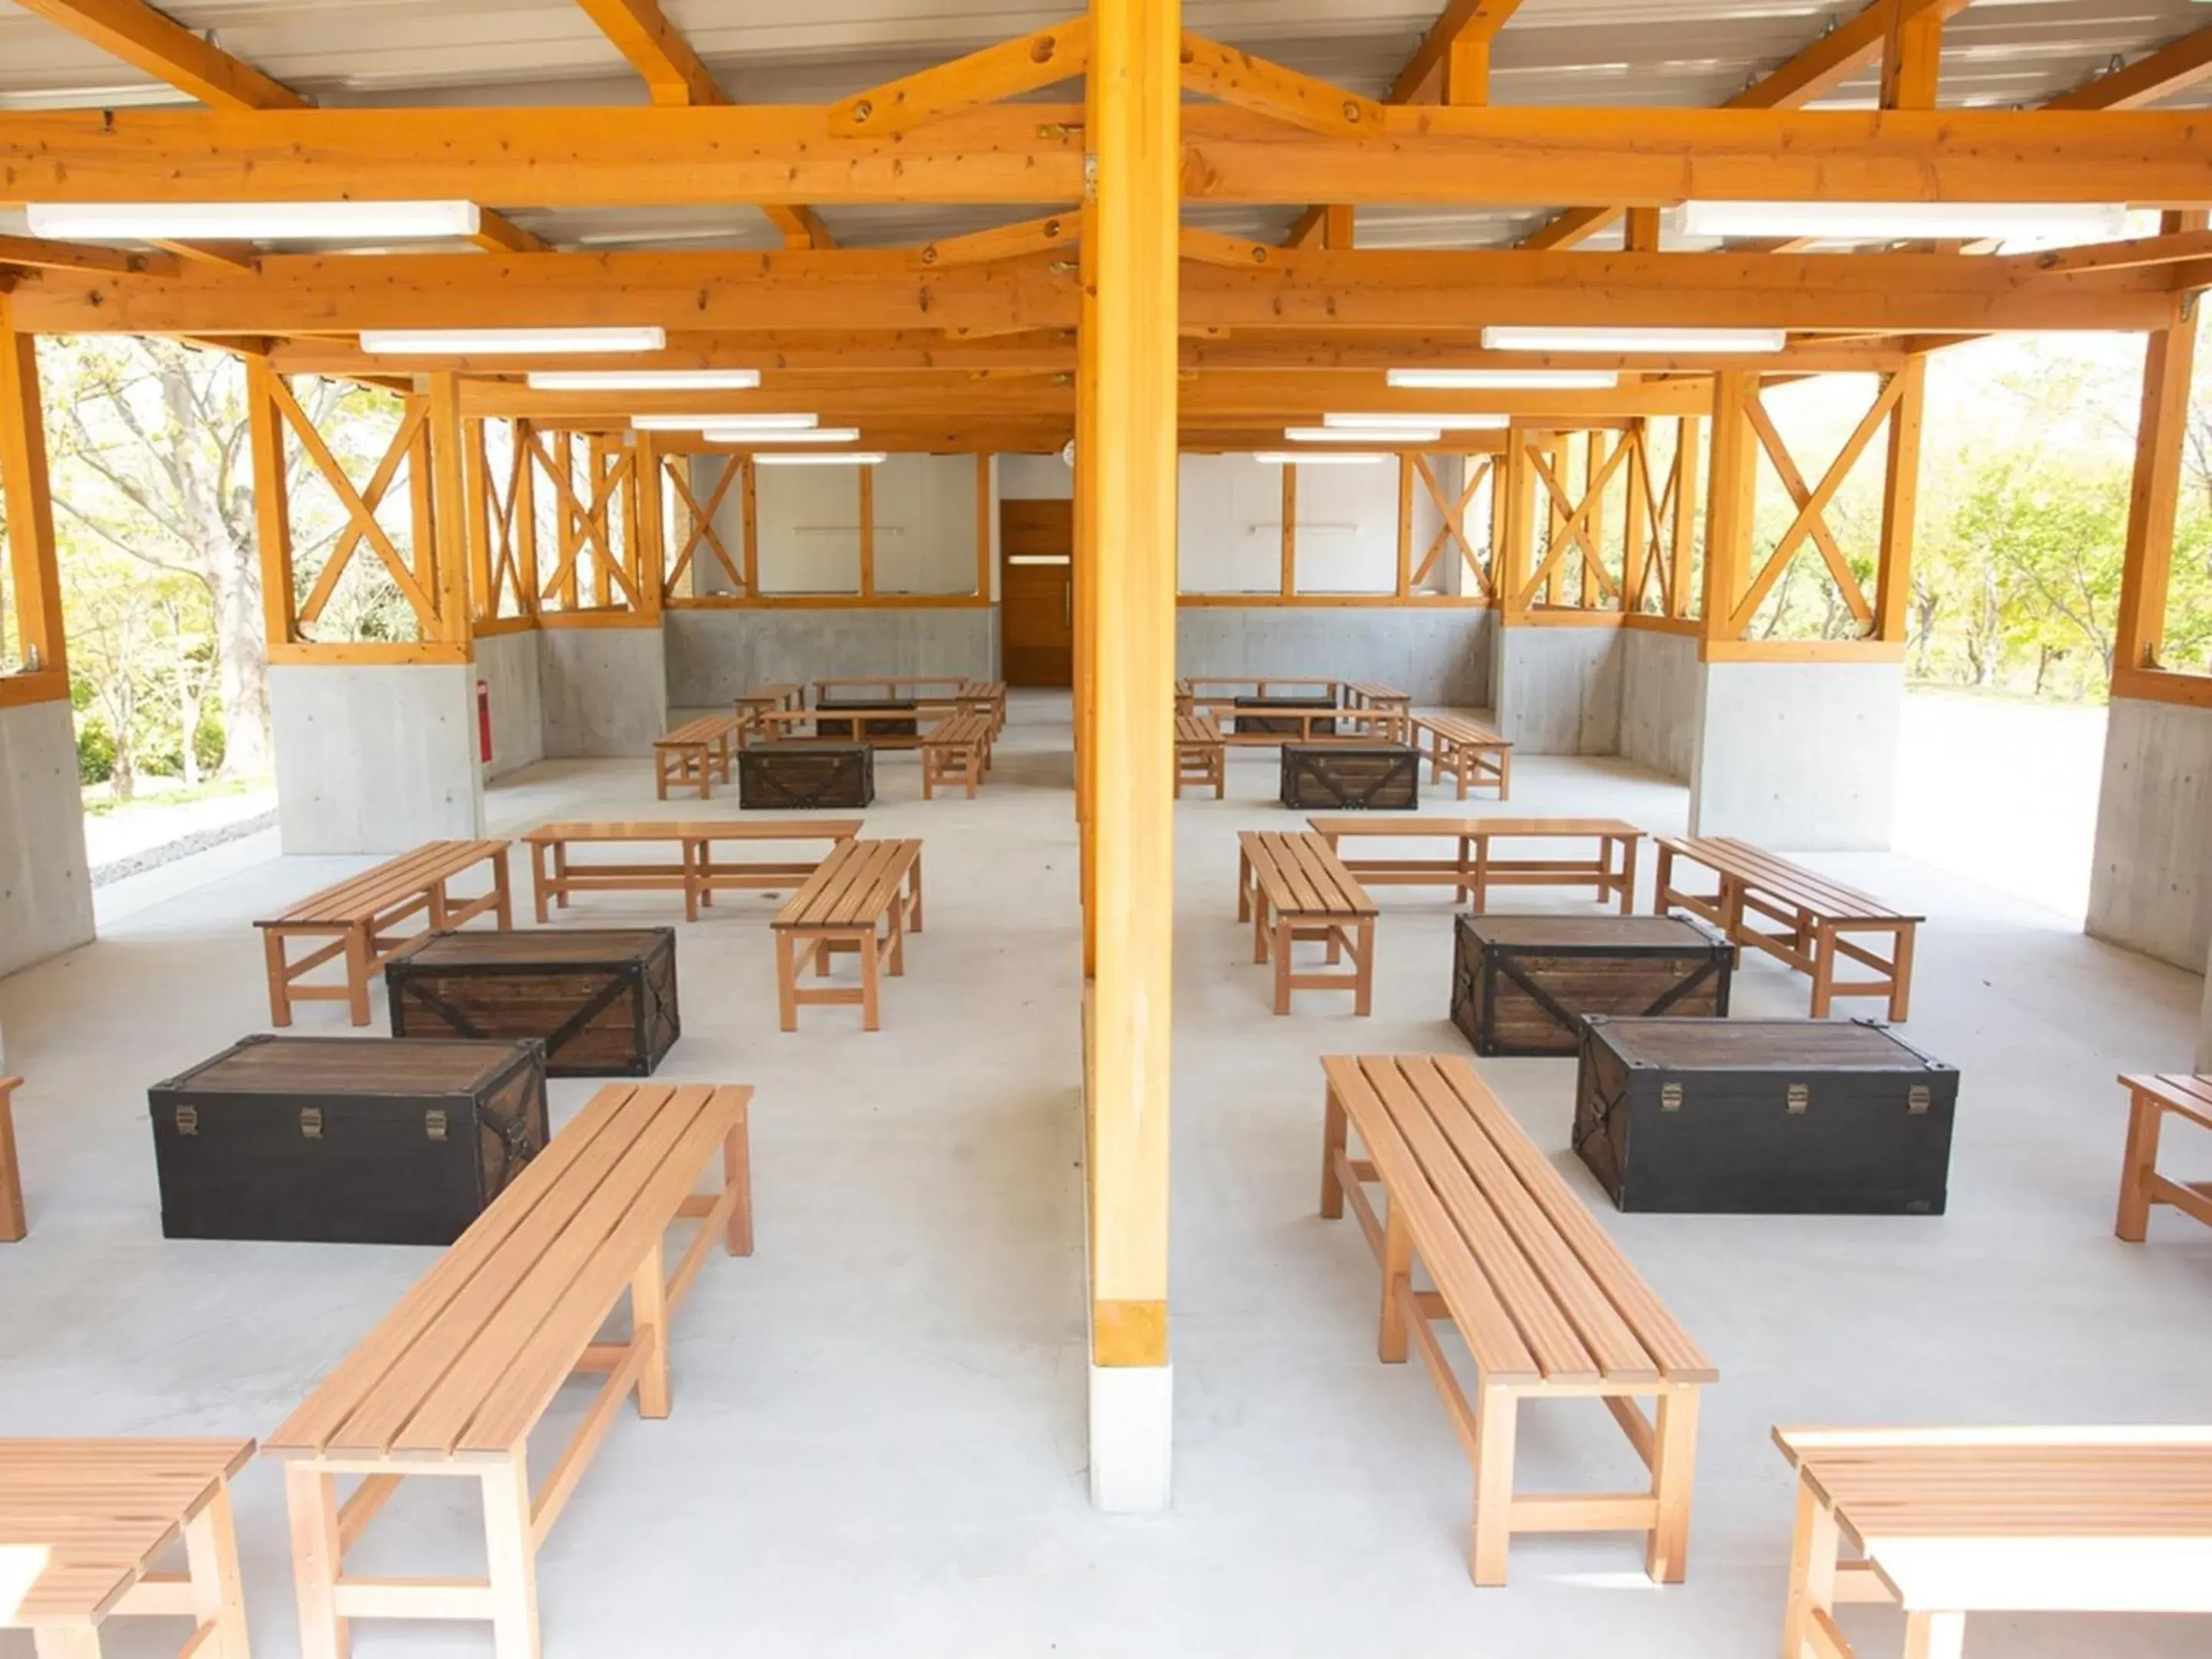 BBQ facilities in Matsue Forest Park